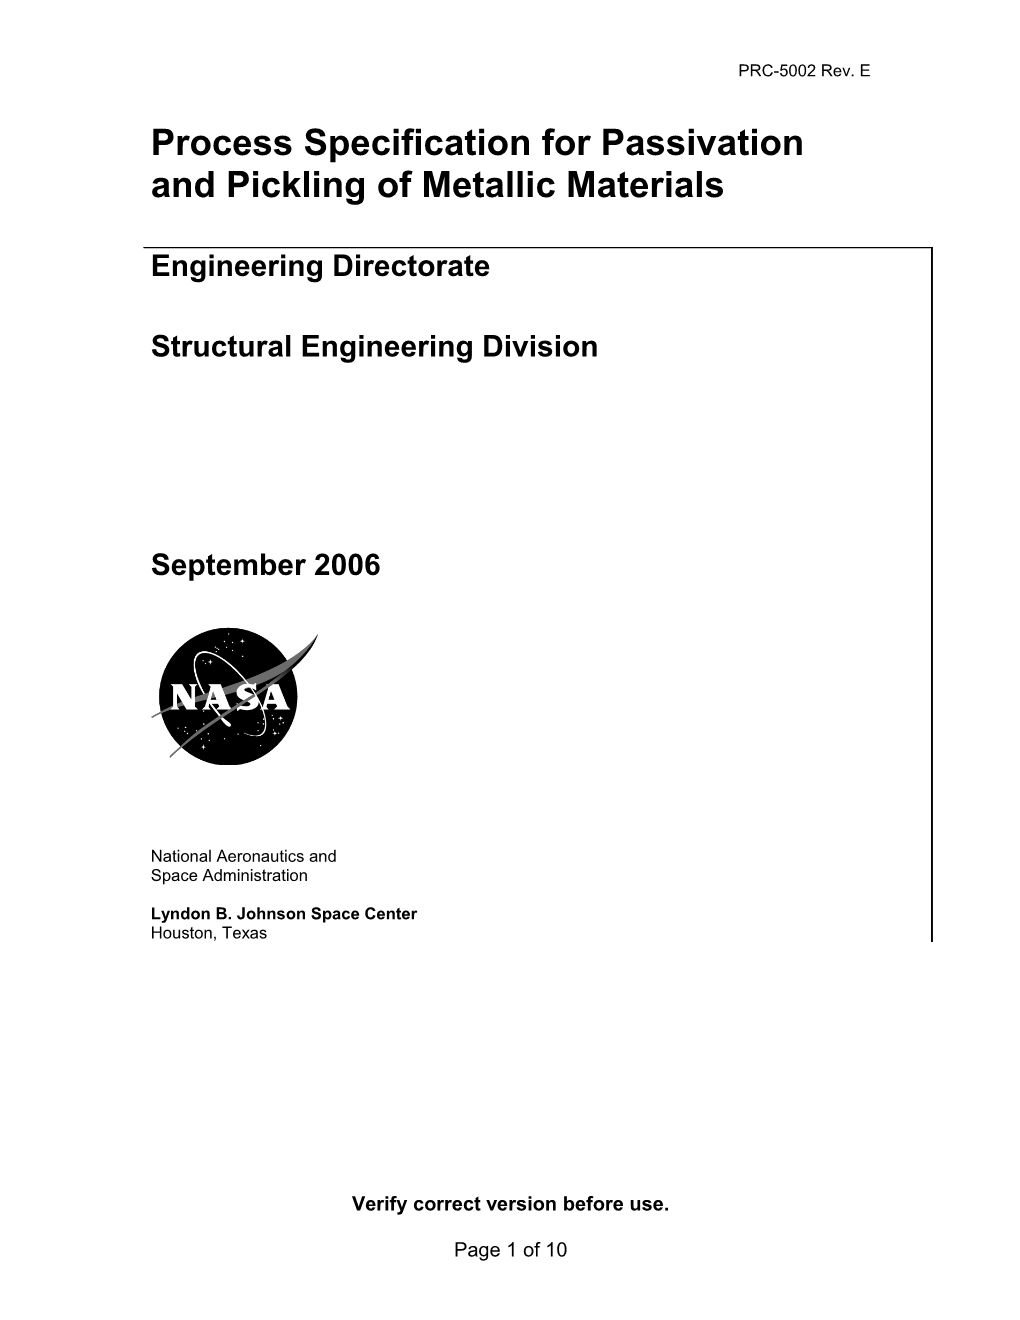 Process Specification for Passivation and Pickling of Metallic Materials